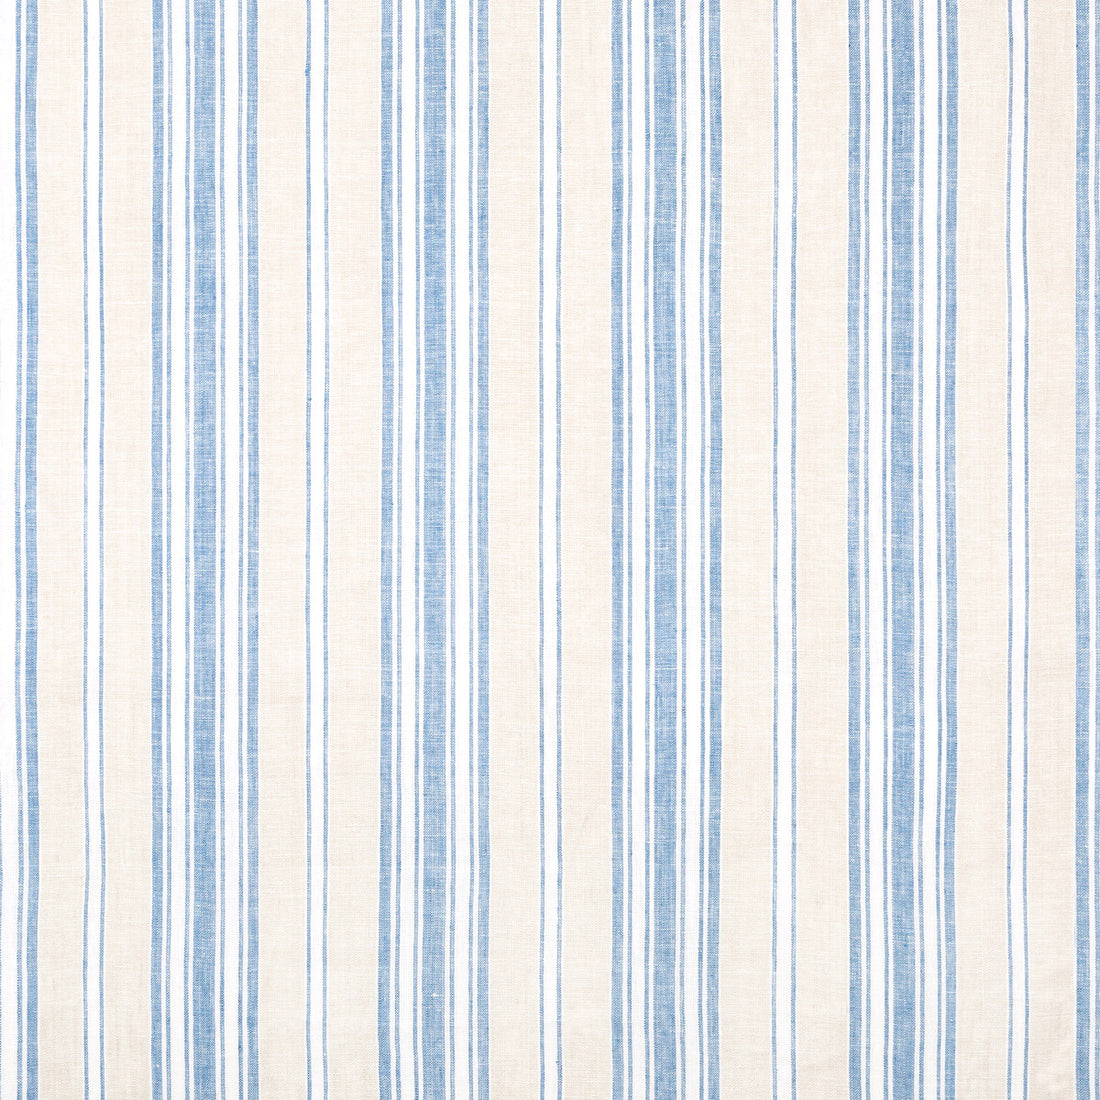 Laurel Stripe fabric in capri color - pattern 2020189.165.0 - by Lee Jofa in the Avondale collection